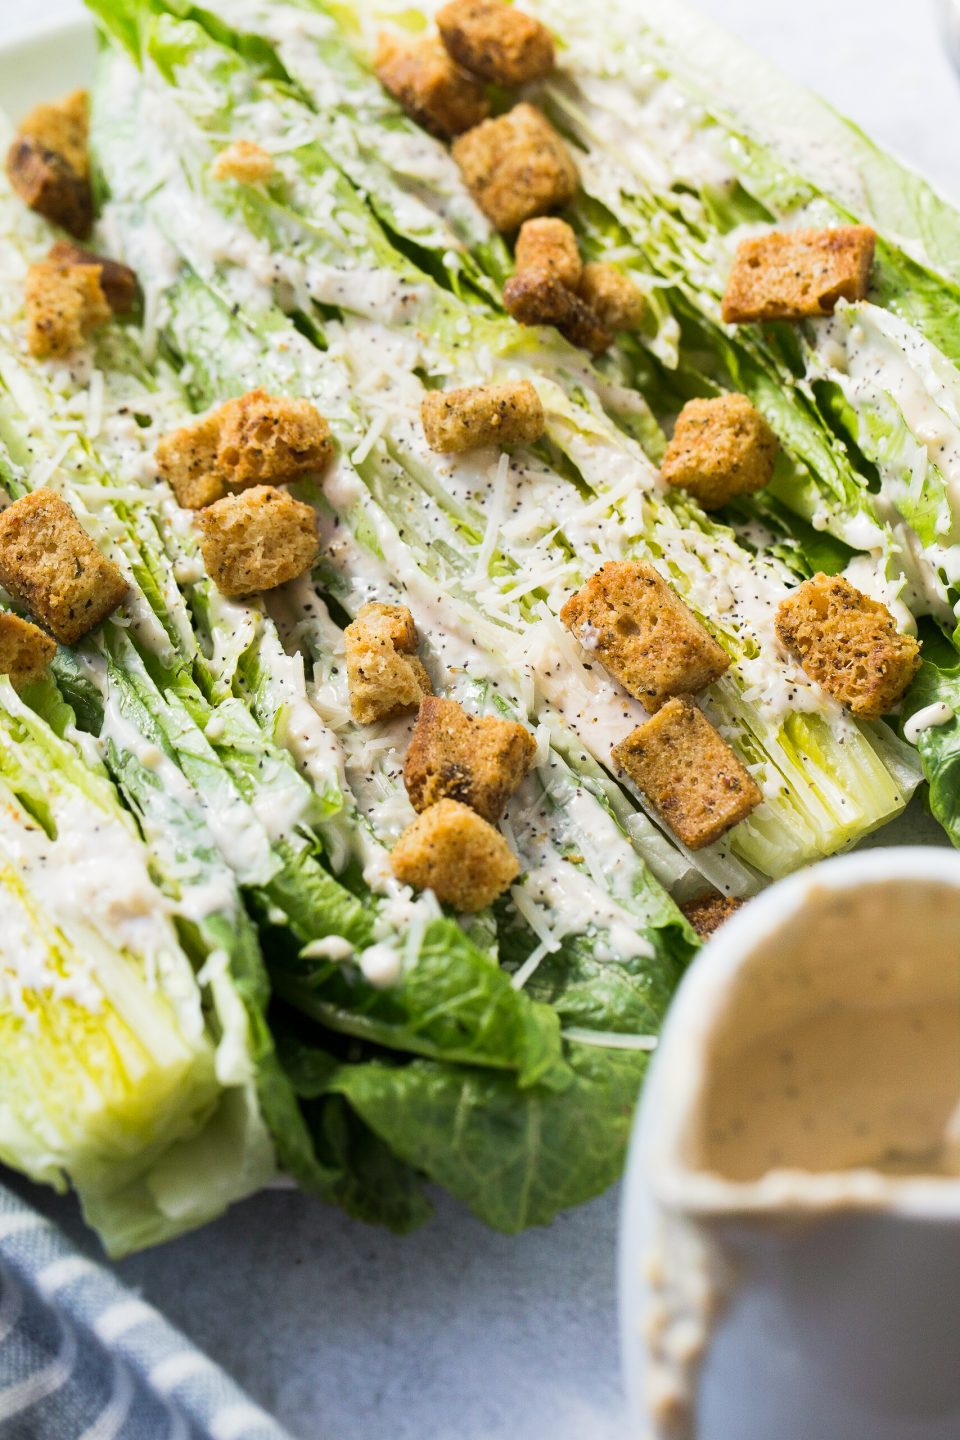 Overhead shot of hearts of romaine cut in half and smeared with caesar dressing. Some wooden spoons are placed overlapping in the bottom right.